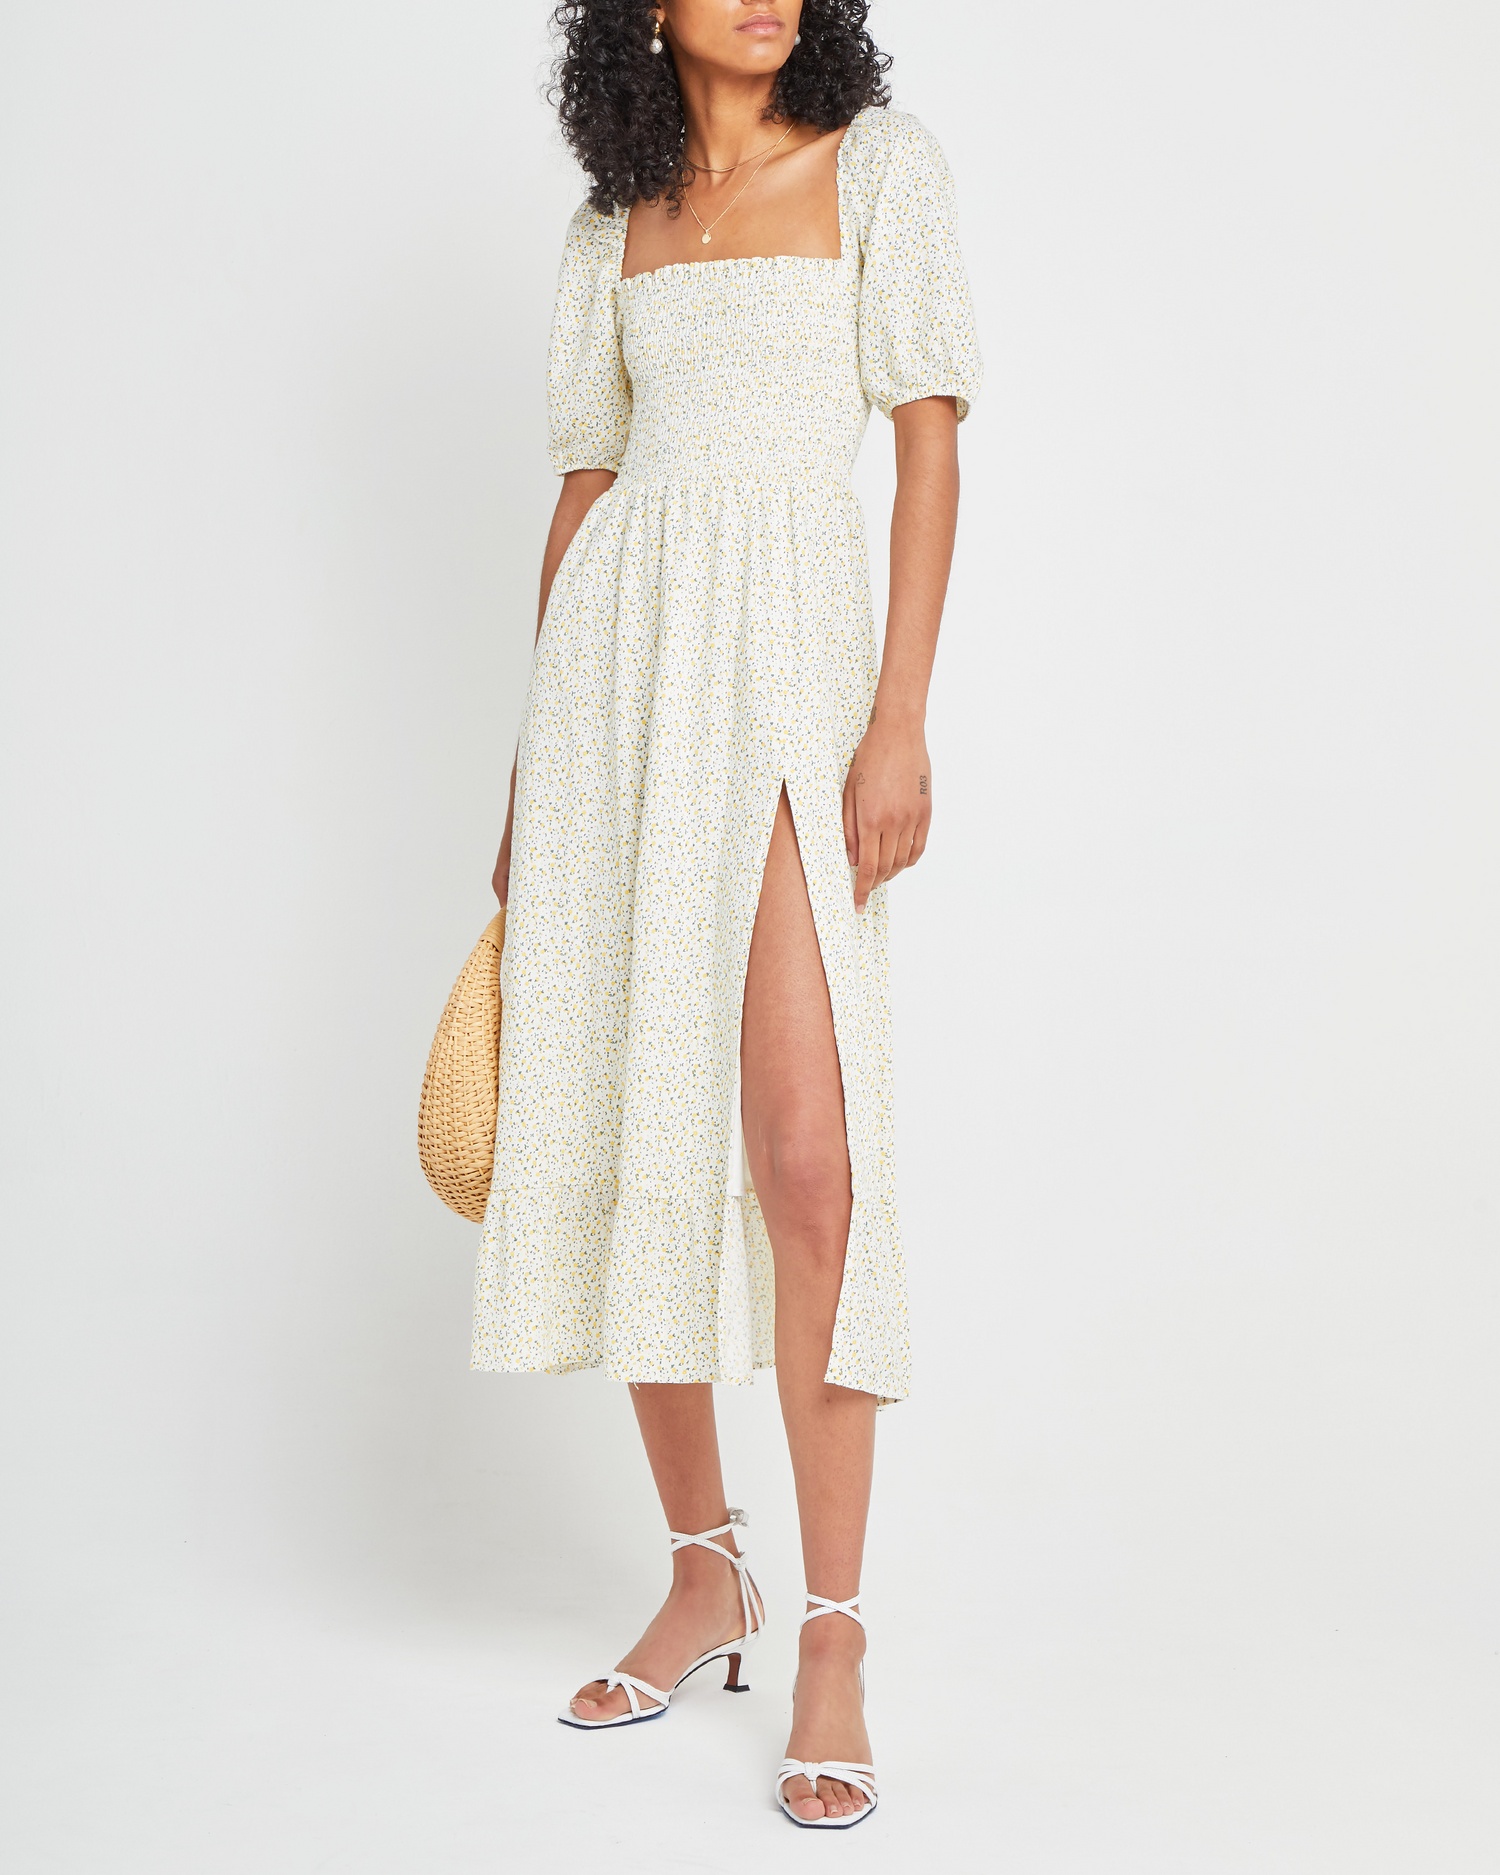 First image of Daisy Midi Dress, a yellow midi dress, side slit, smocked bodice, square neckline, puff sleeves